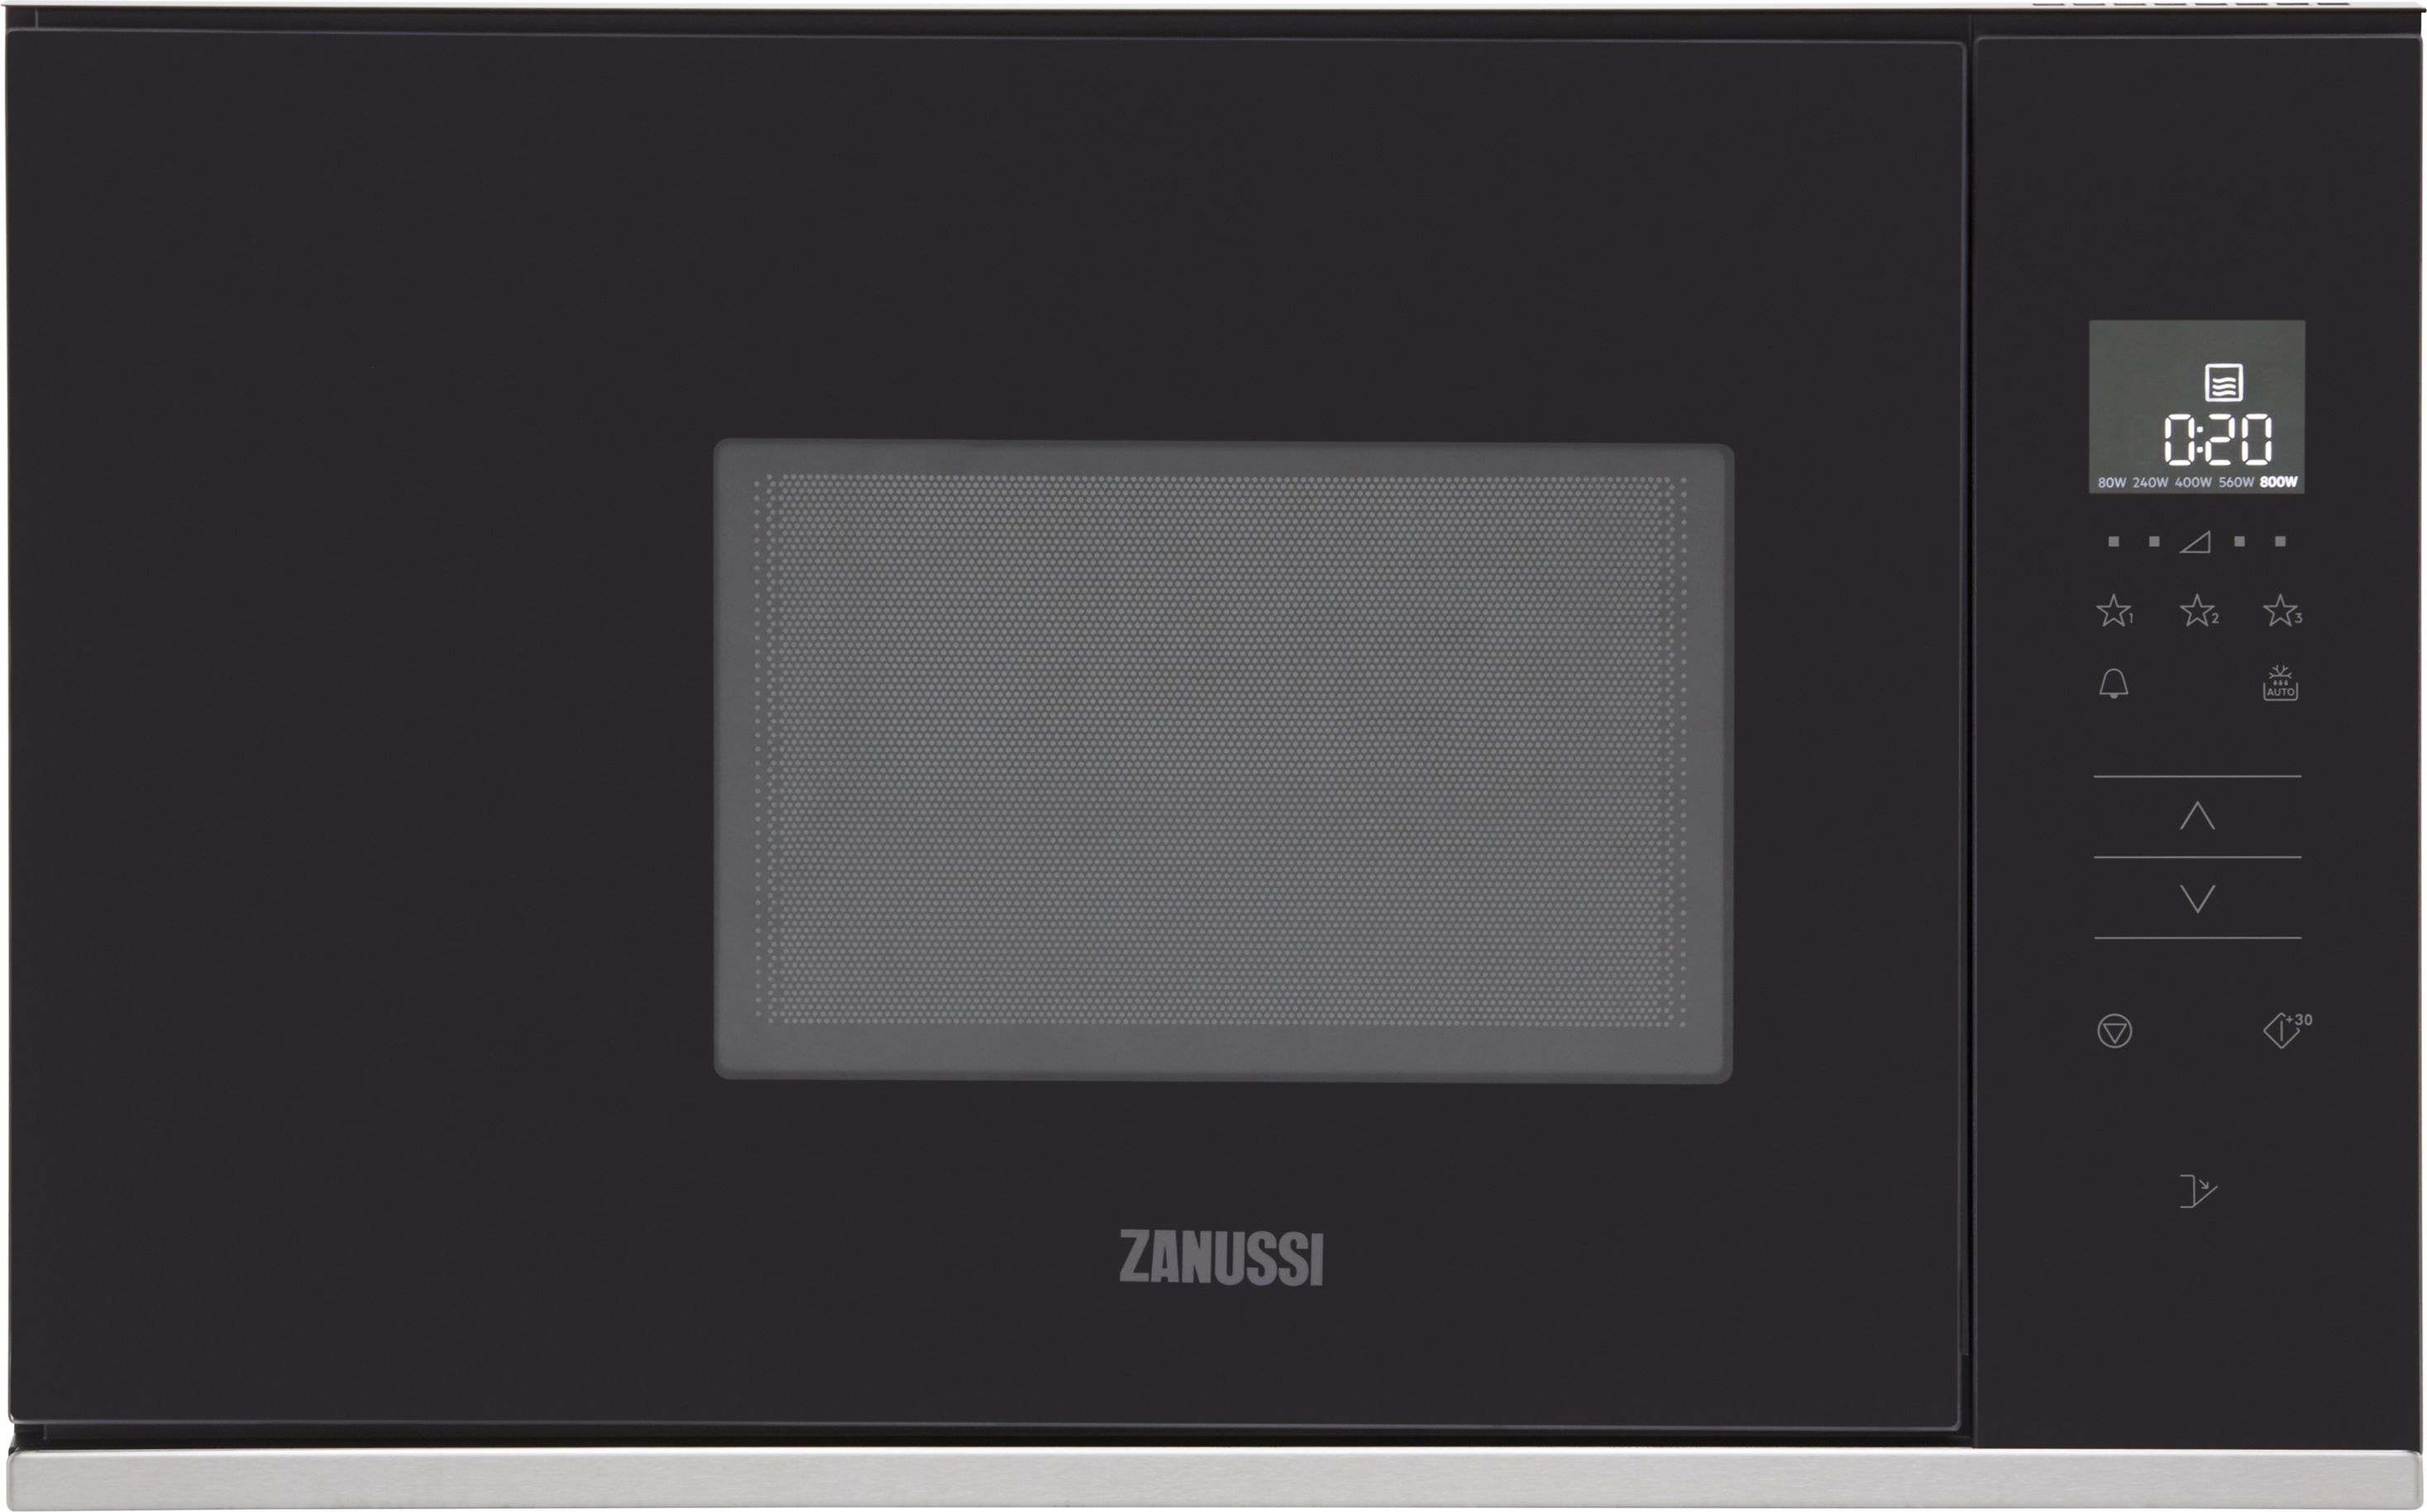 Zanussi ZMBN2SX 37cm tall, 59cm wide, Built In Microwave - Stainless Steel, Stainless Steel